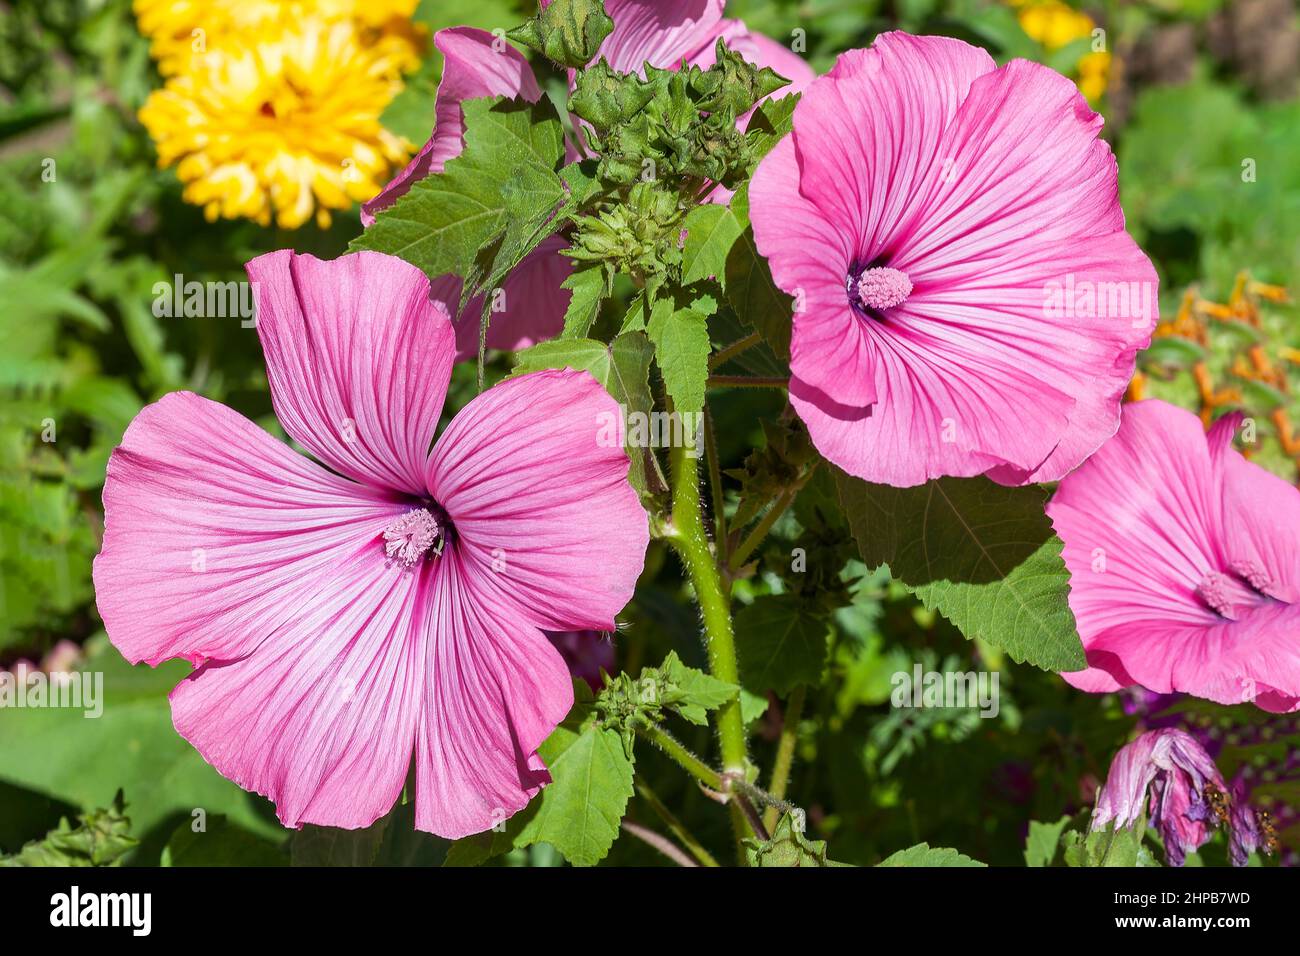 Lavatera trimestris a summer autumn fall flowering plant with a pink summertime flower commonly known as malva tree mallow, stock photo image Stock Photo